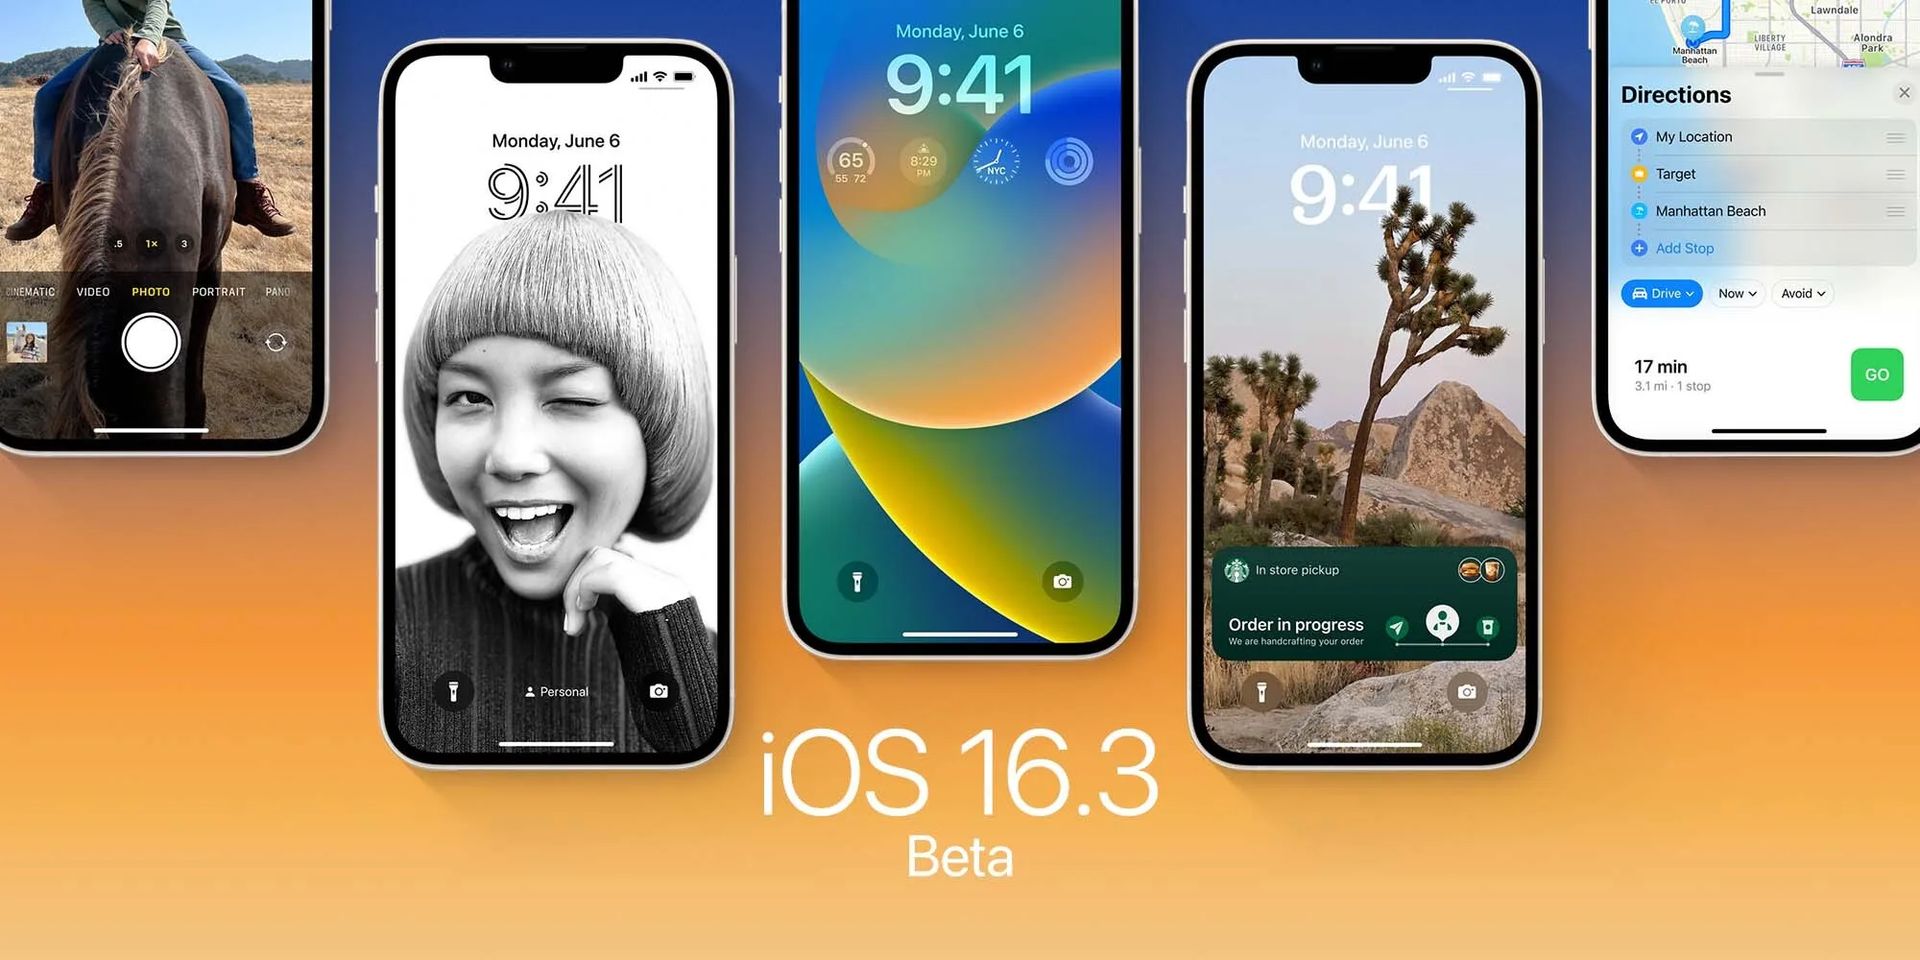 iOS 16.3 public beta is out: What are the new features?